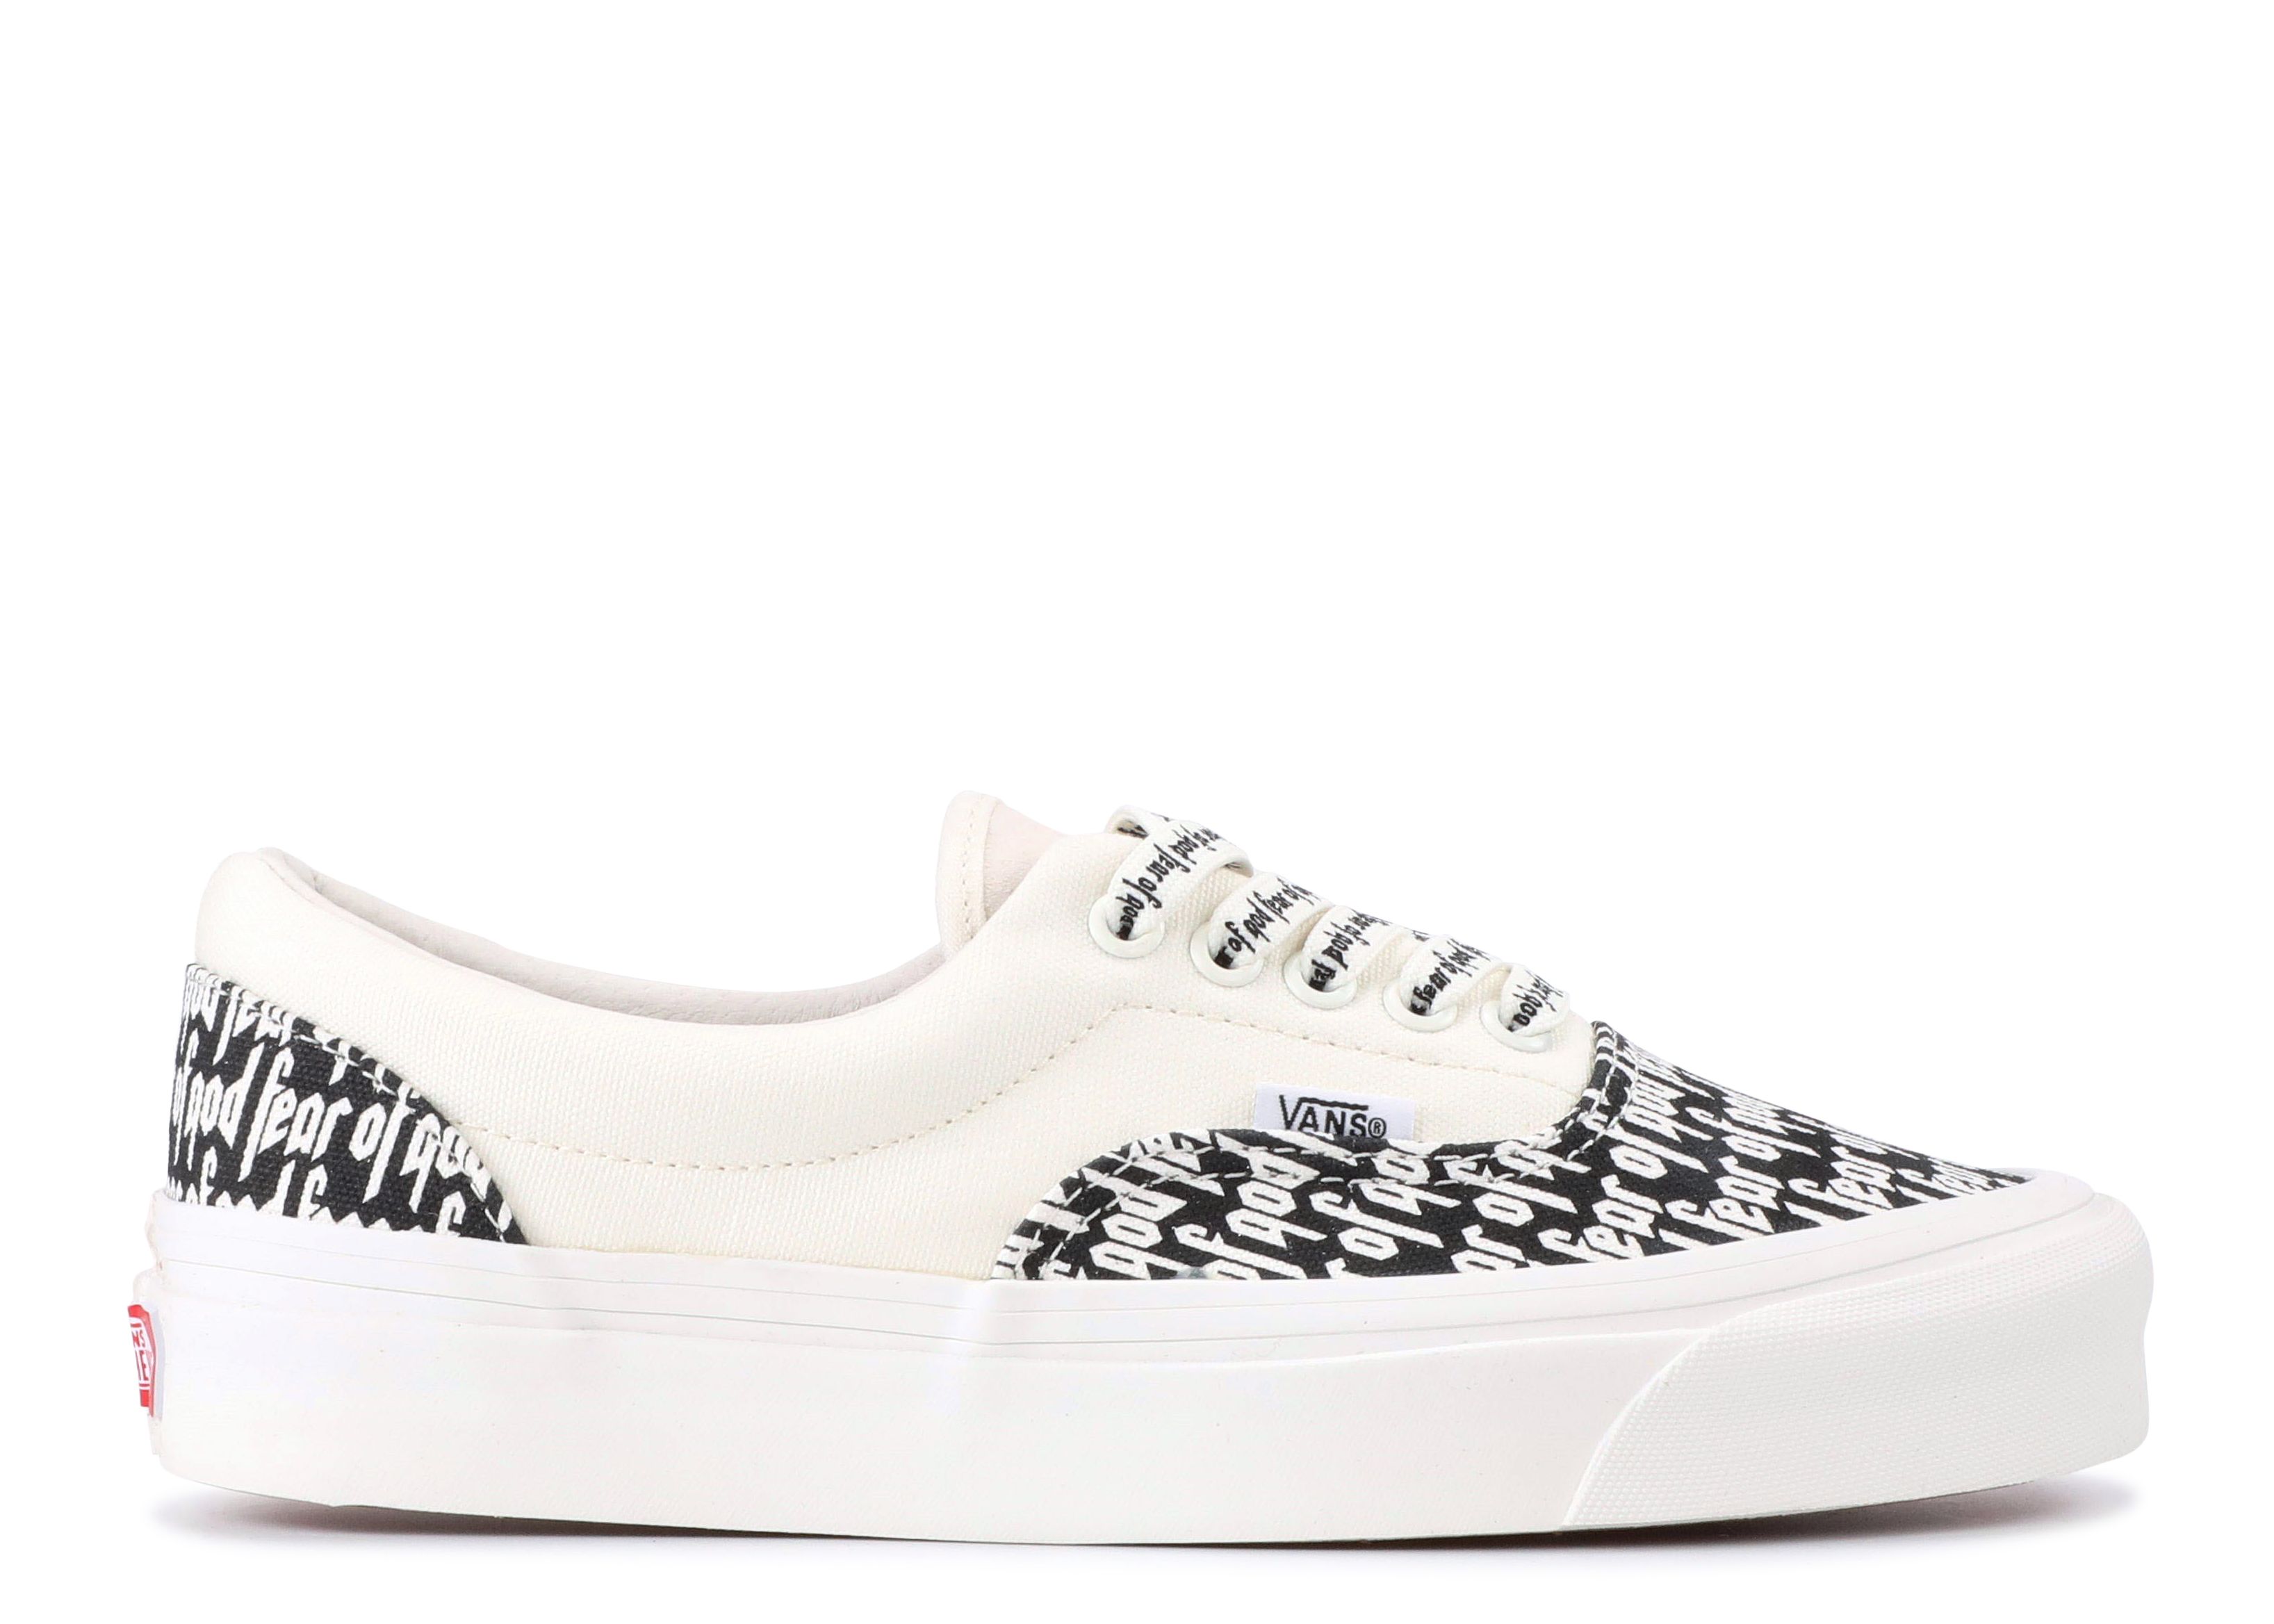 Кроссовки Vans Fear Of God X Era 95 Dx 'Collection 2 White', белый primal fear the history of fear primal fear